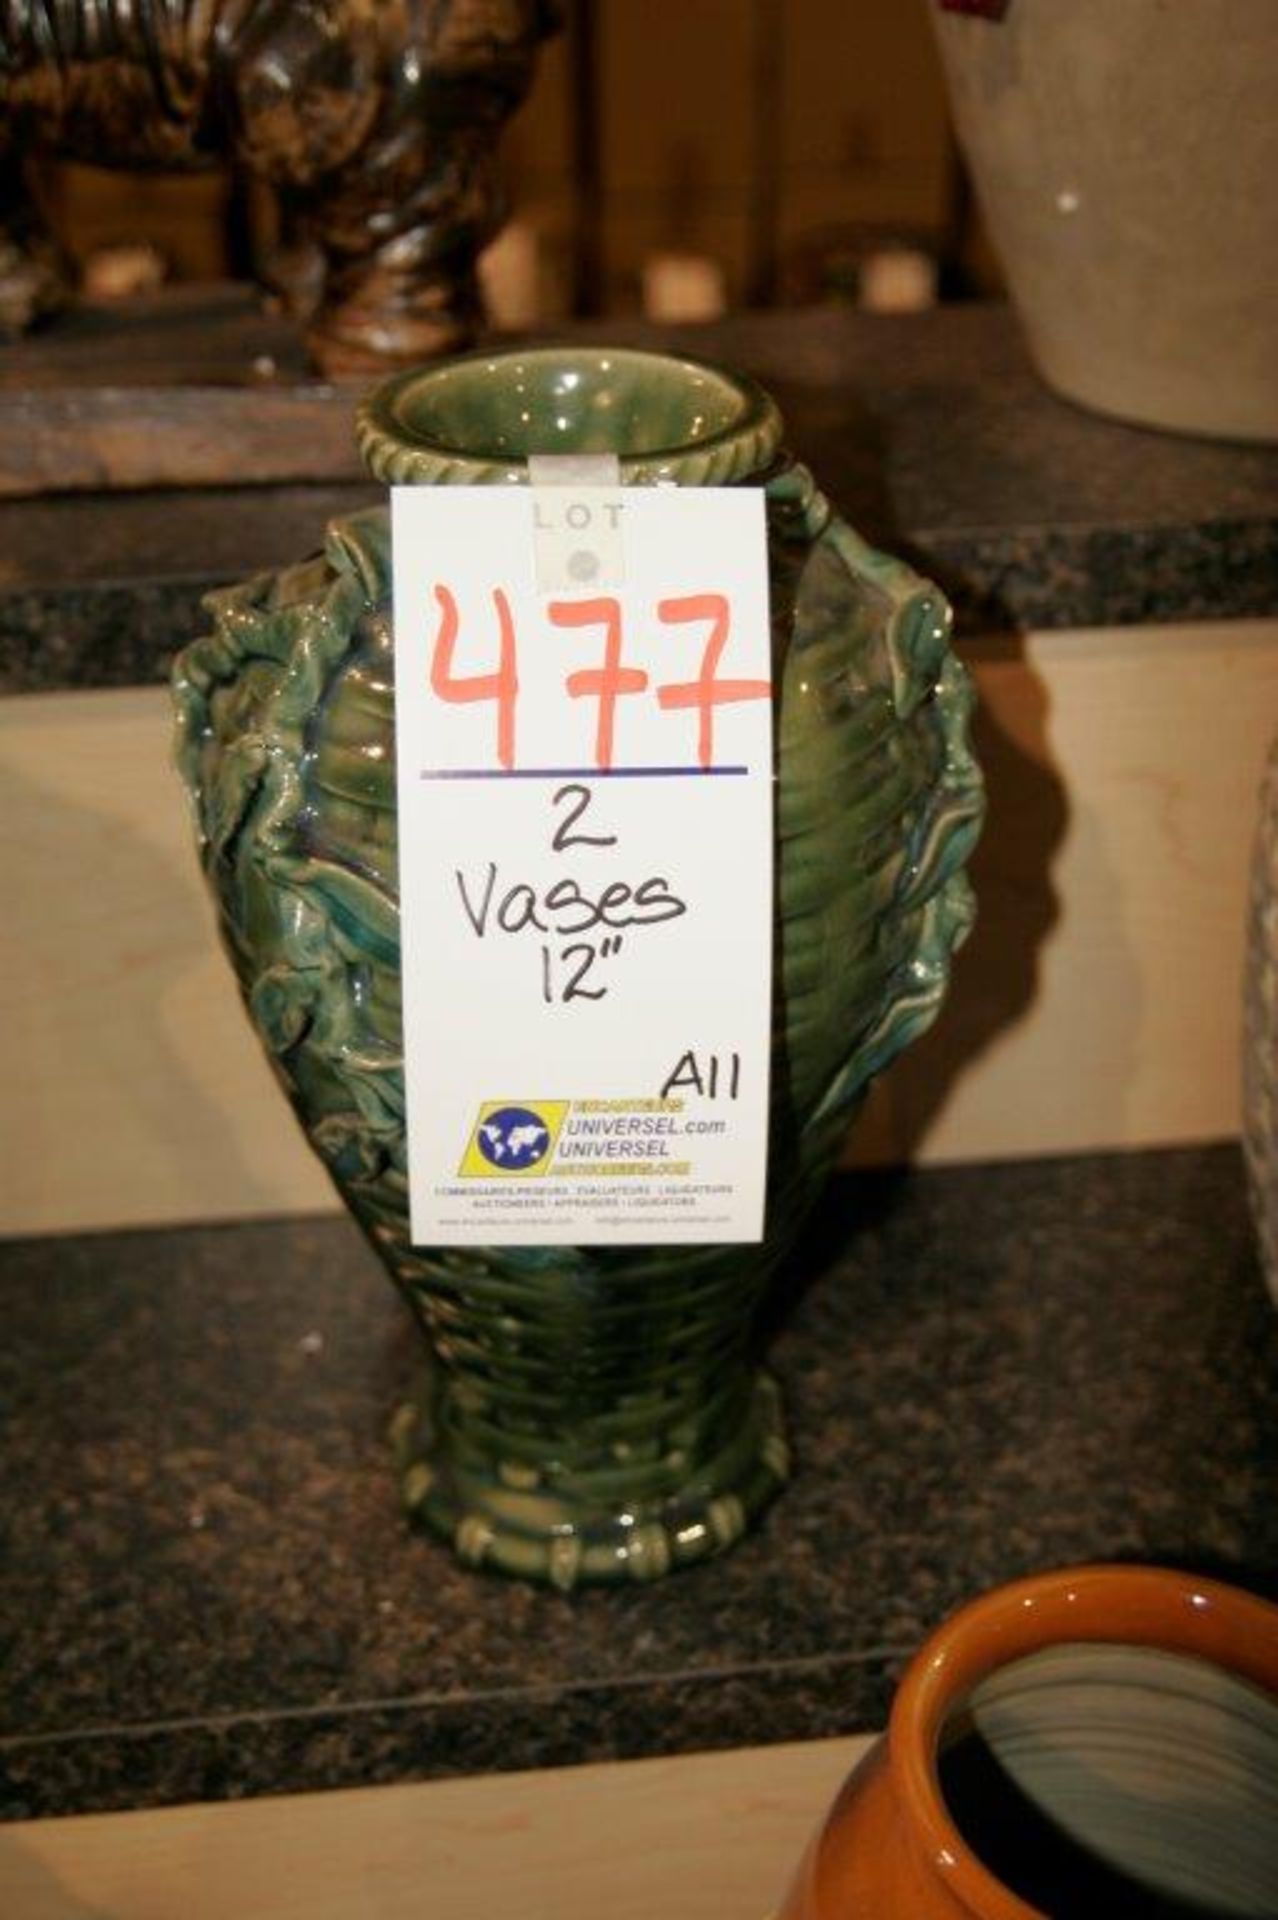 Vases 12" (A11)